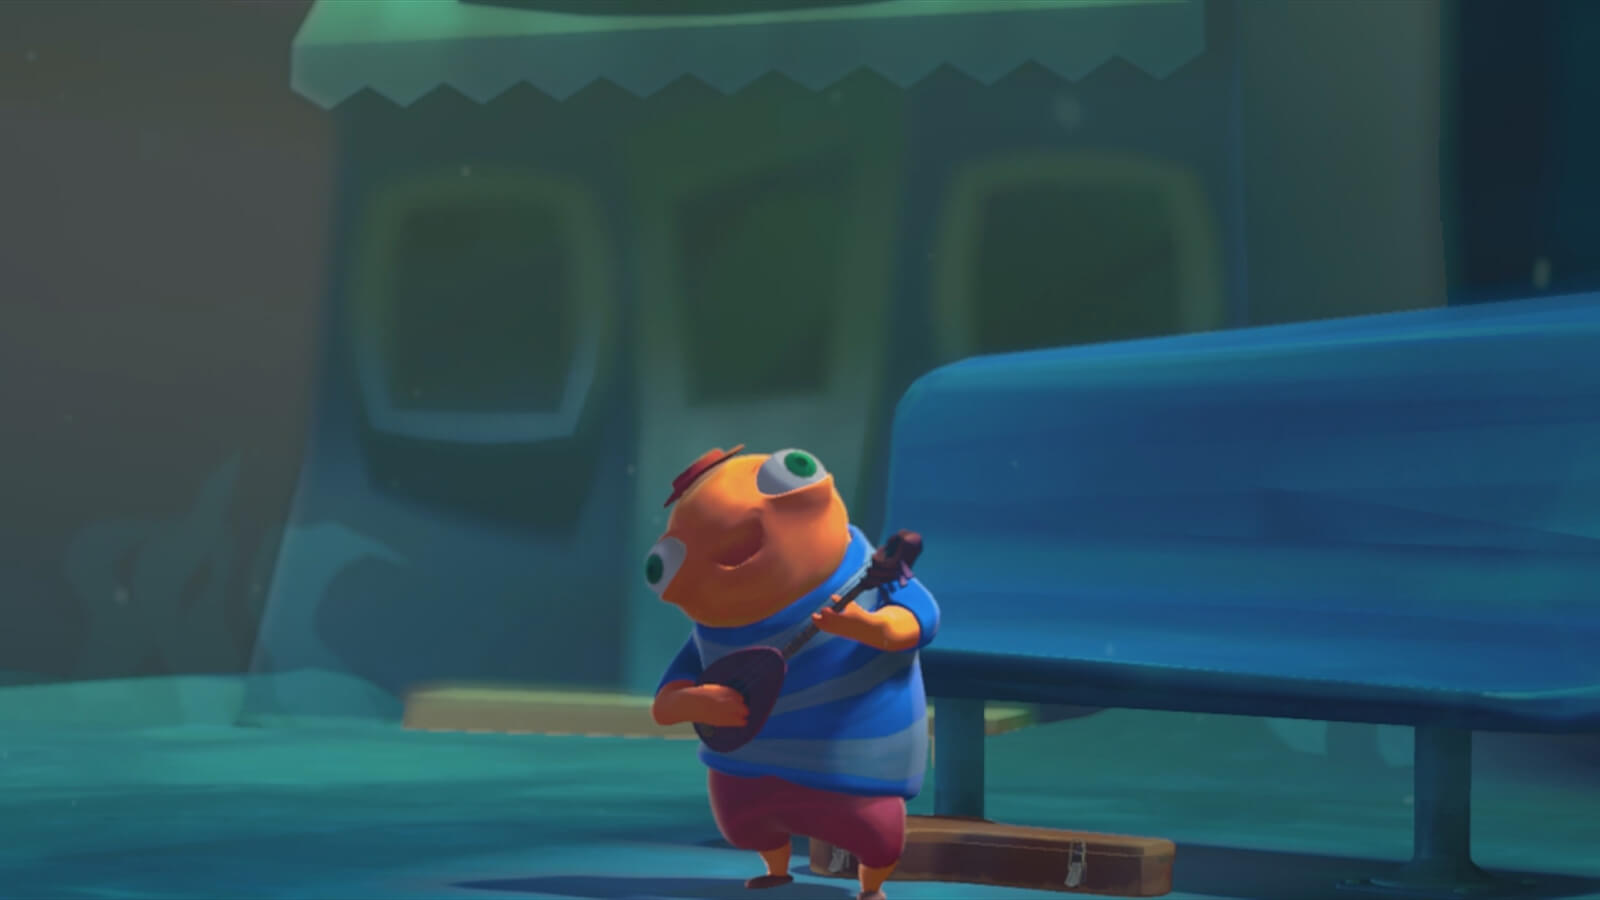 An orange fish in a red cap and striped blue t-shirt and holding happily plays a guitar-like instrument at a bus stop